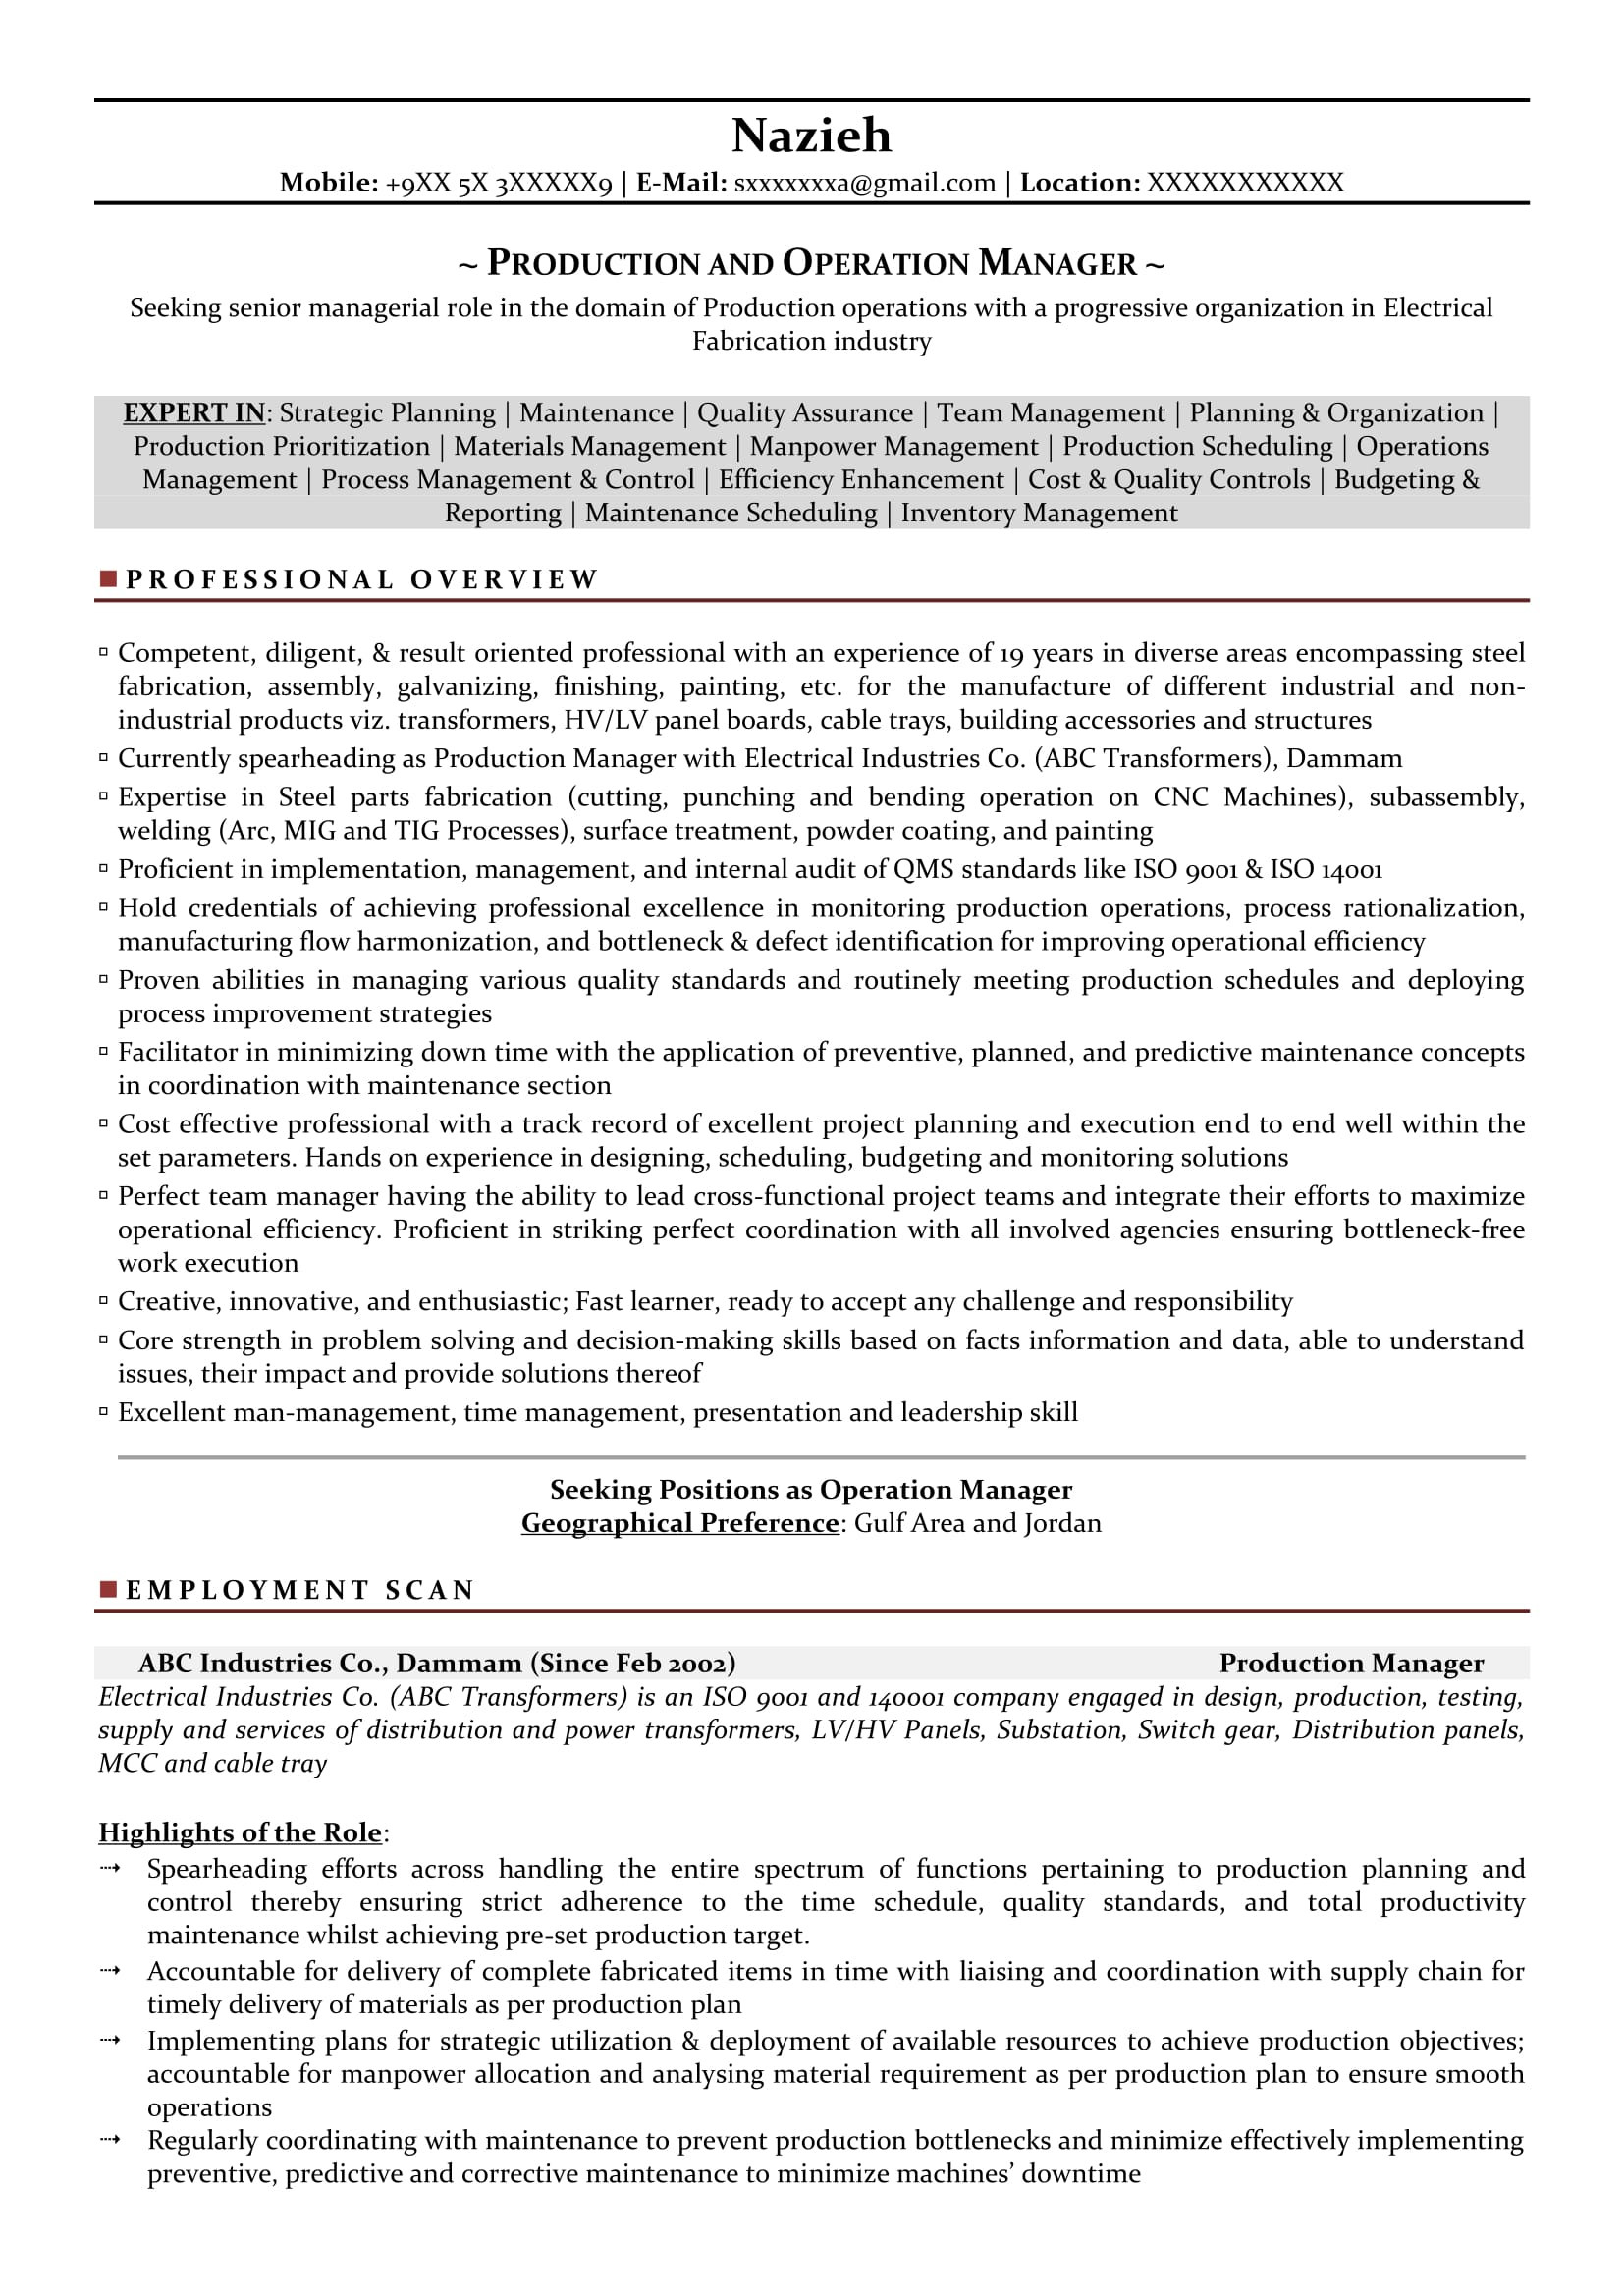 Sample Resume for Production Support Manager Production Manager Sample Resumes, Download Resume format Templates!